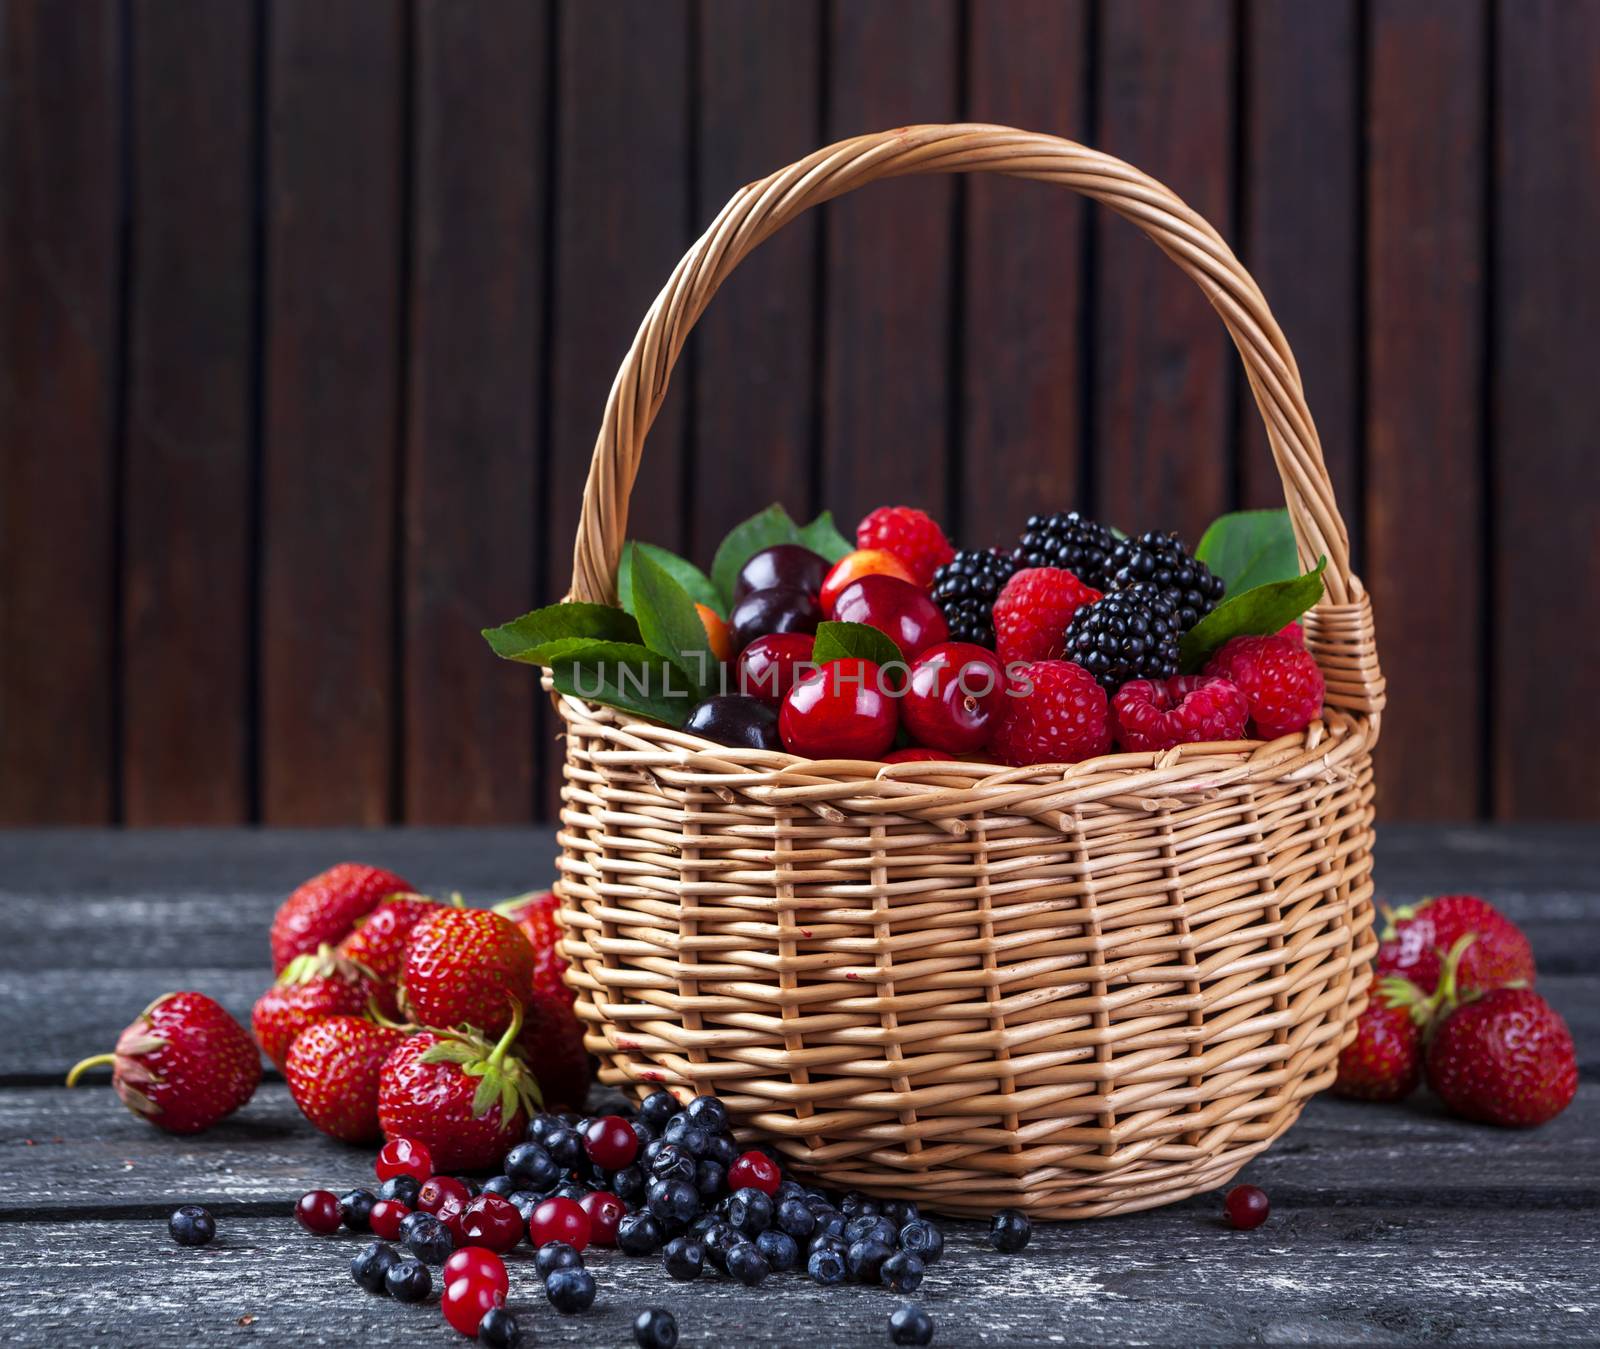 Fresh forest berries in basket on rustic wooden background. Copy space